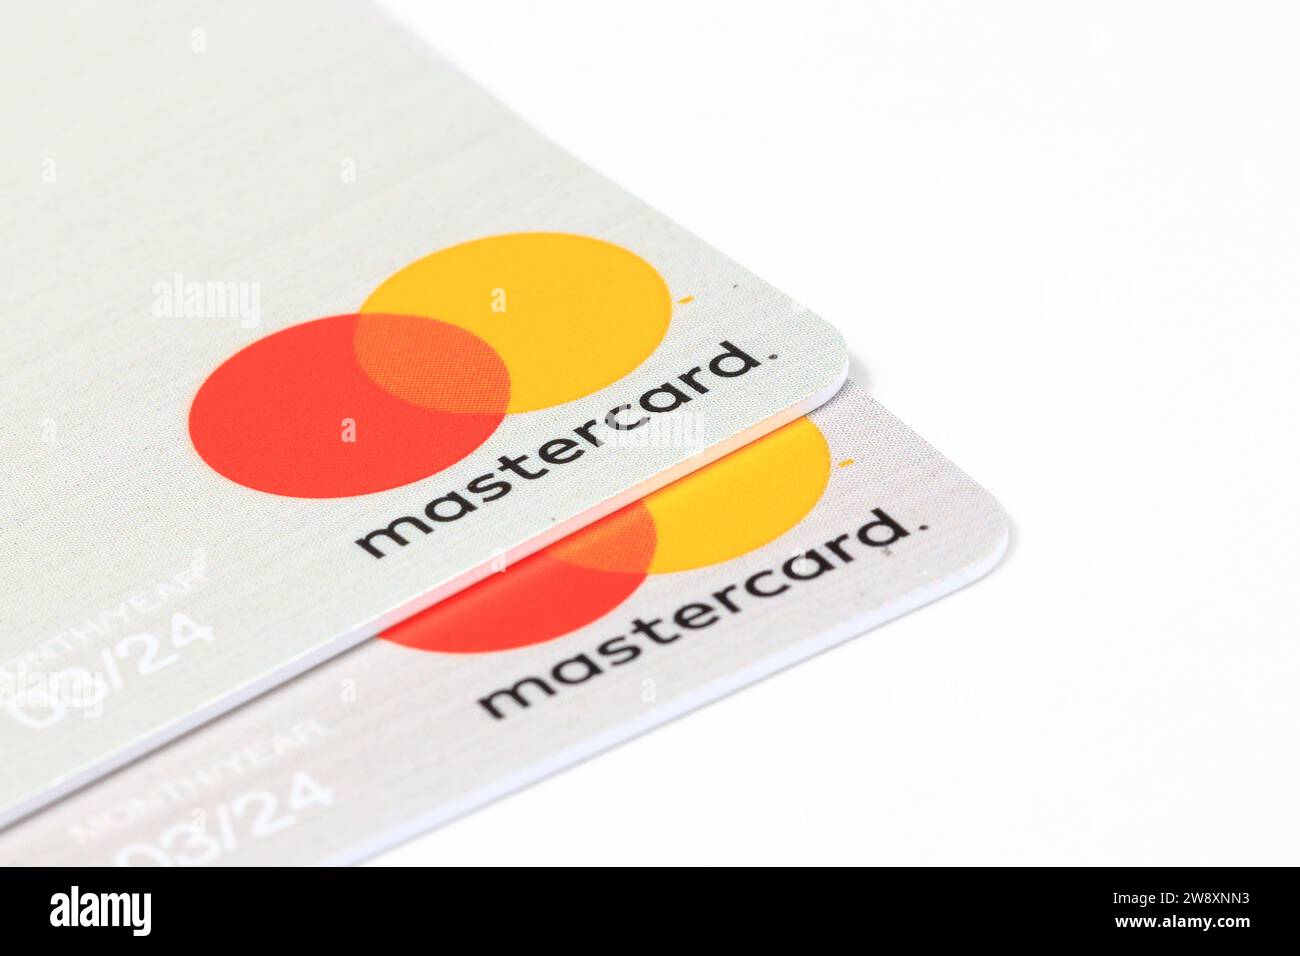 Credit cards with part of logo on corner of card isolated on white background. Stock Photo